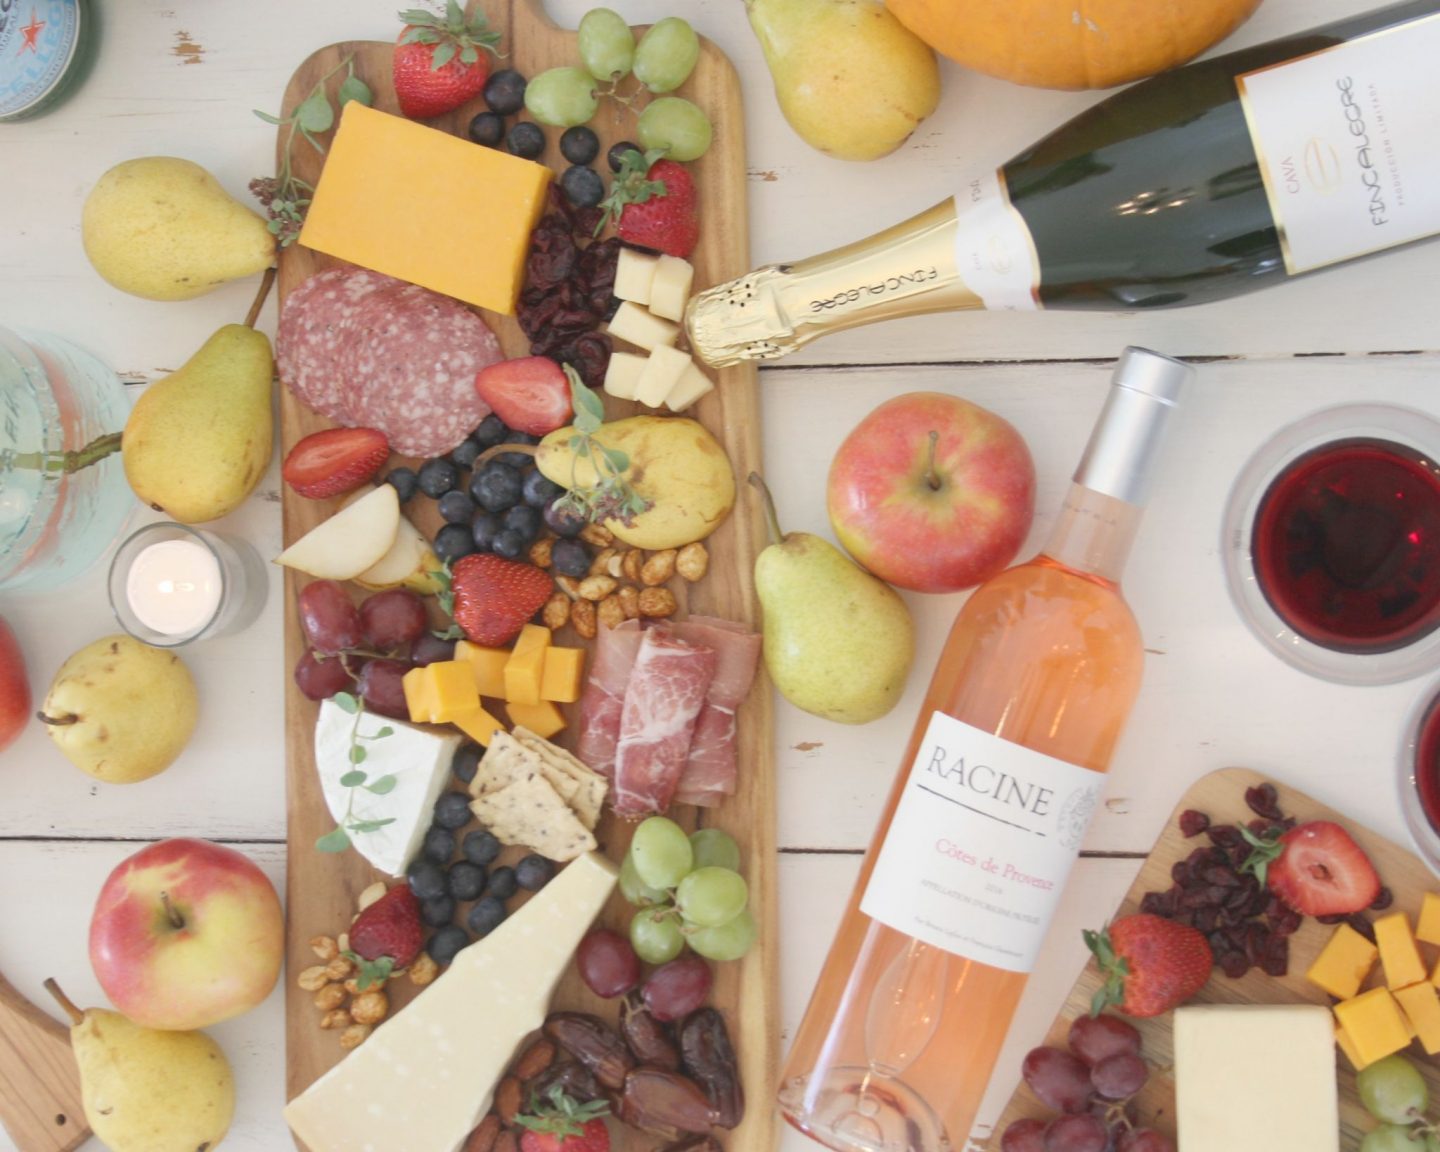 Easy Entertaining Idea With No Cooking or Baking! How to assemble a cheeseboard for a party or holiday. Let the food become the beautiful tablescape! Design/photo: Hello Lovely Studio. #hellolovelystudio #easyappetizer #easyentertaining #cheeseboard #wineandcheese #tablescape #simplerecipe #nocook #nobake #cocktailparty